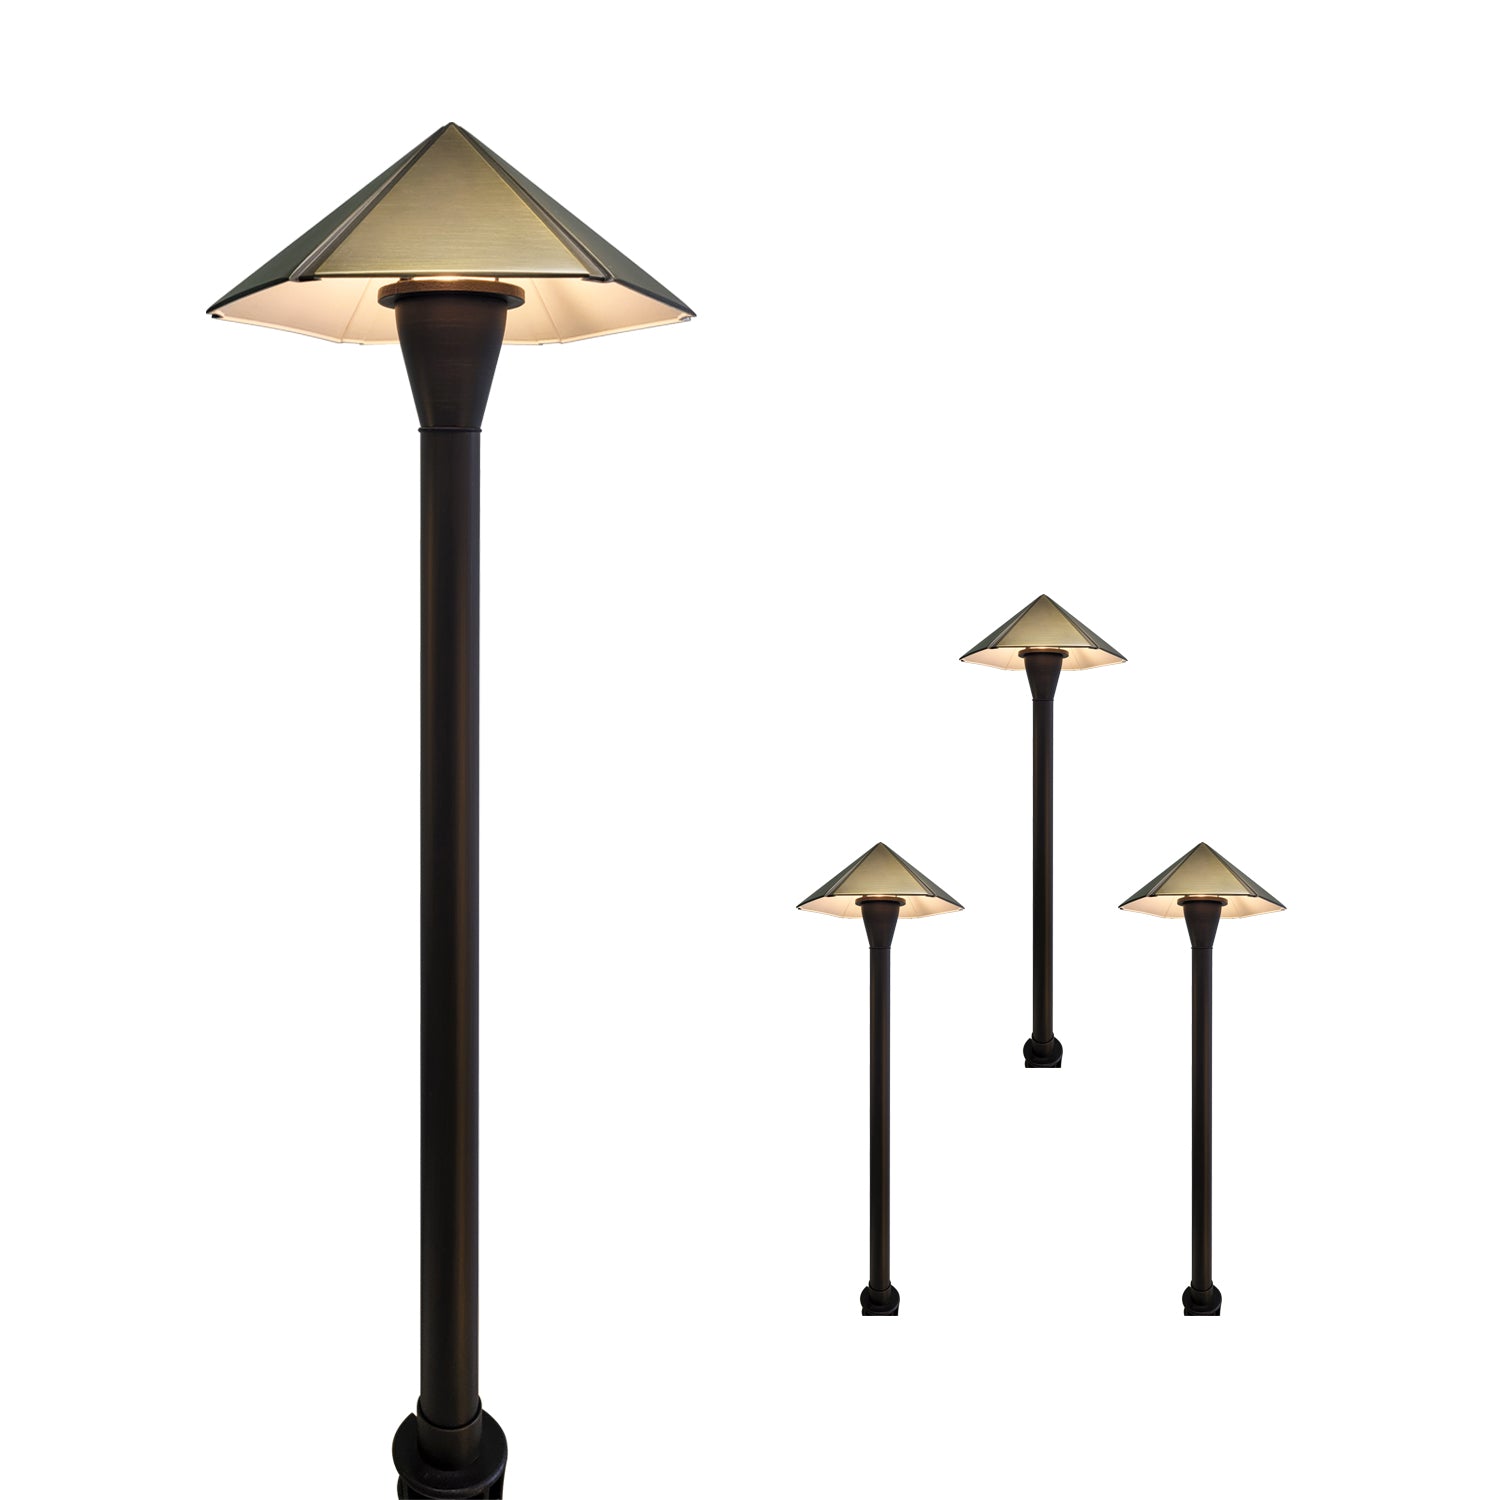 12V low voltage brass pathway lights with pyramid-shaped diffusers for driveways, gardens, and landscapes